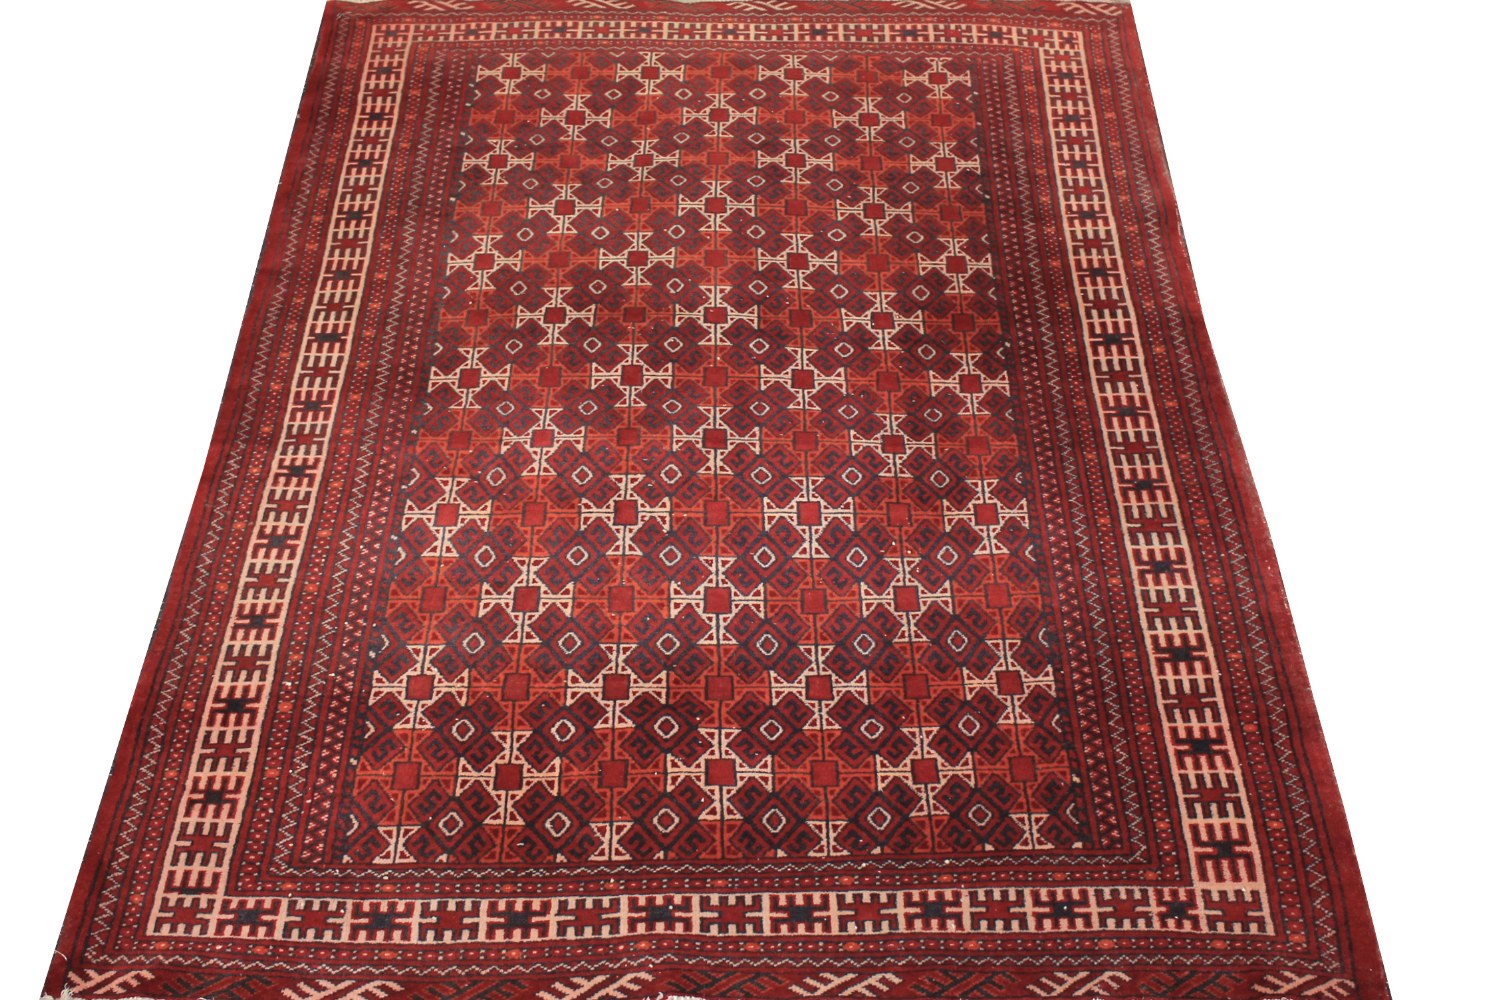 4x6 Kazak Hand Knotted Wool Area Rug - MR0569